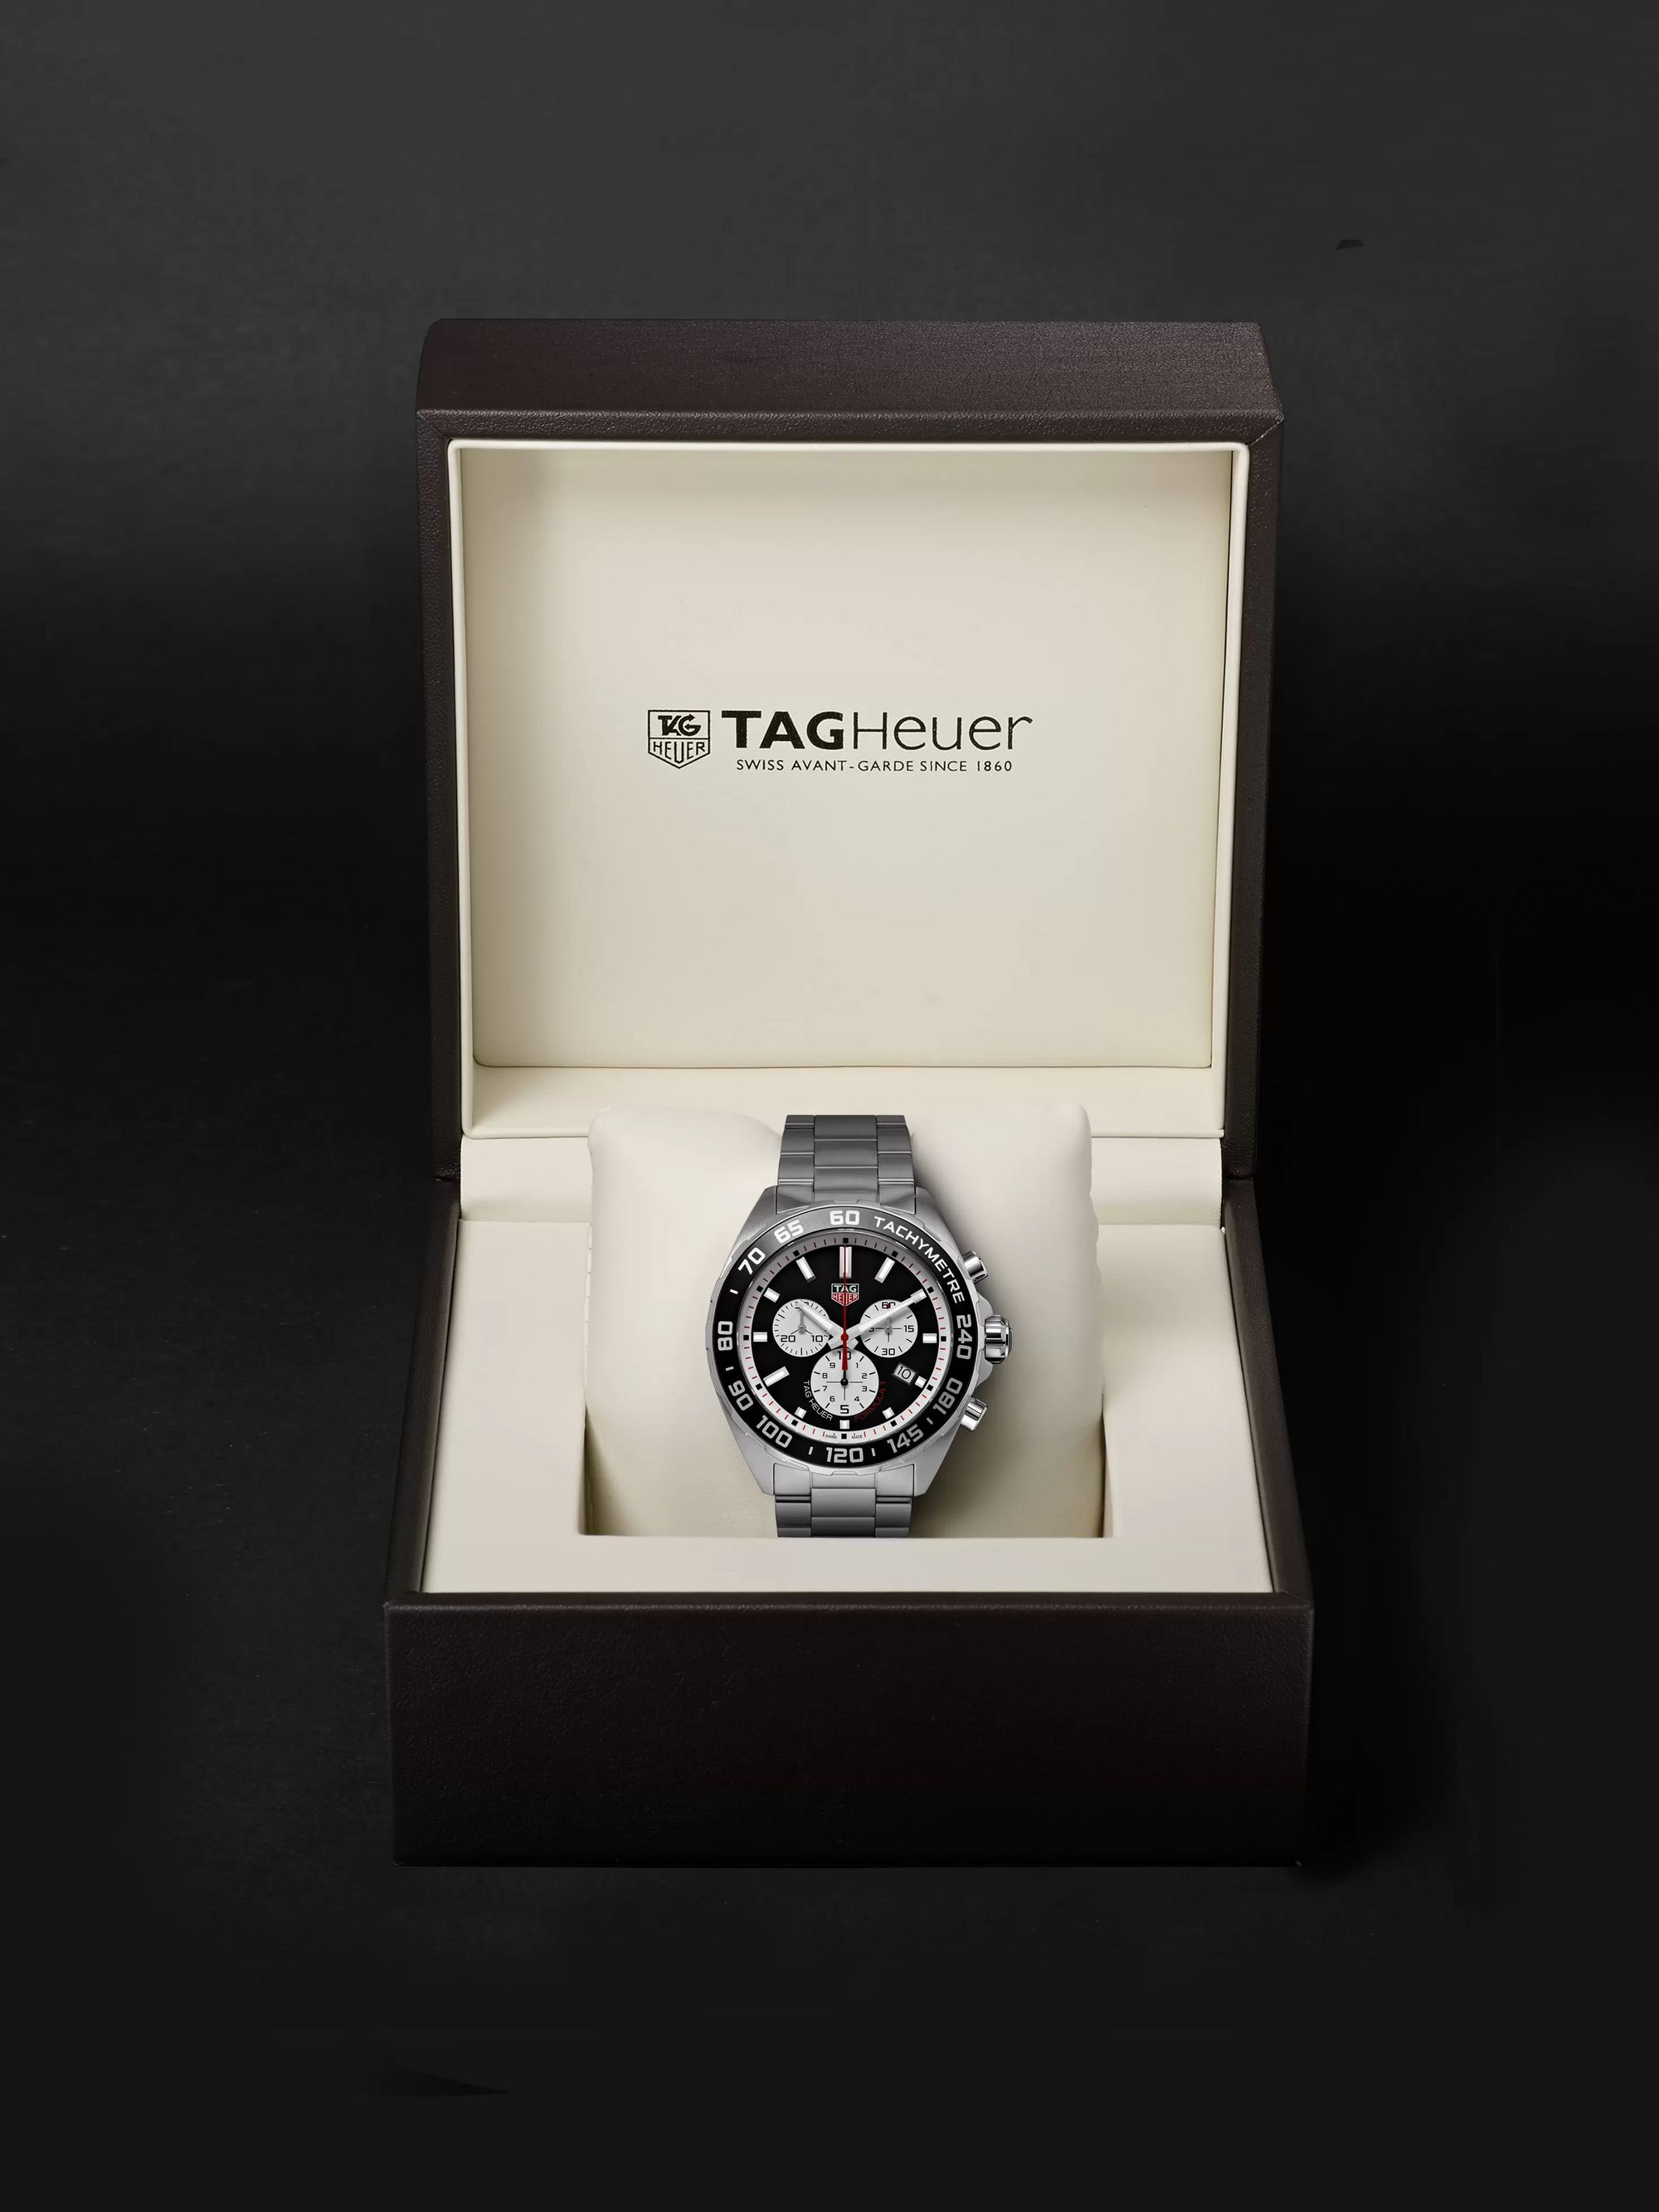 TAG Heuer Formula 1 Aston Martin Red Bull Racing Chronograph 43mm Stainless Steel Watch, Ref. No. CAZ101AB.BA0842